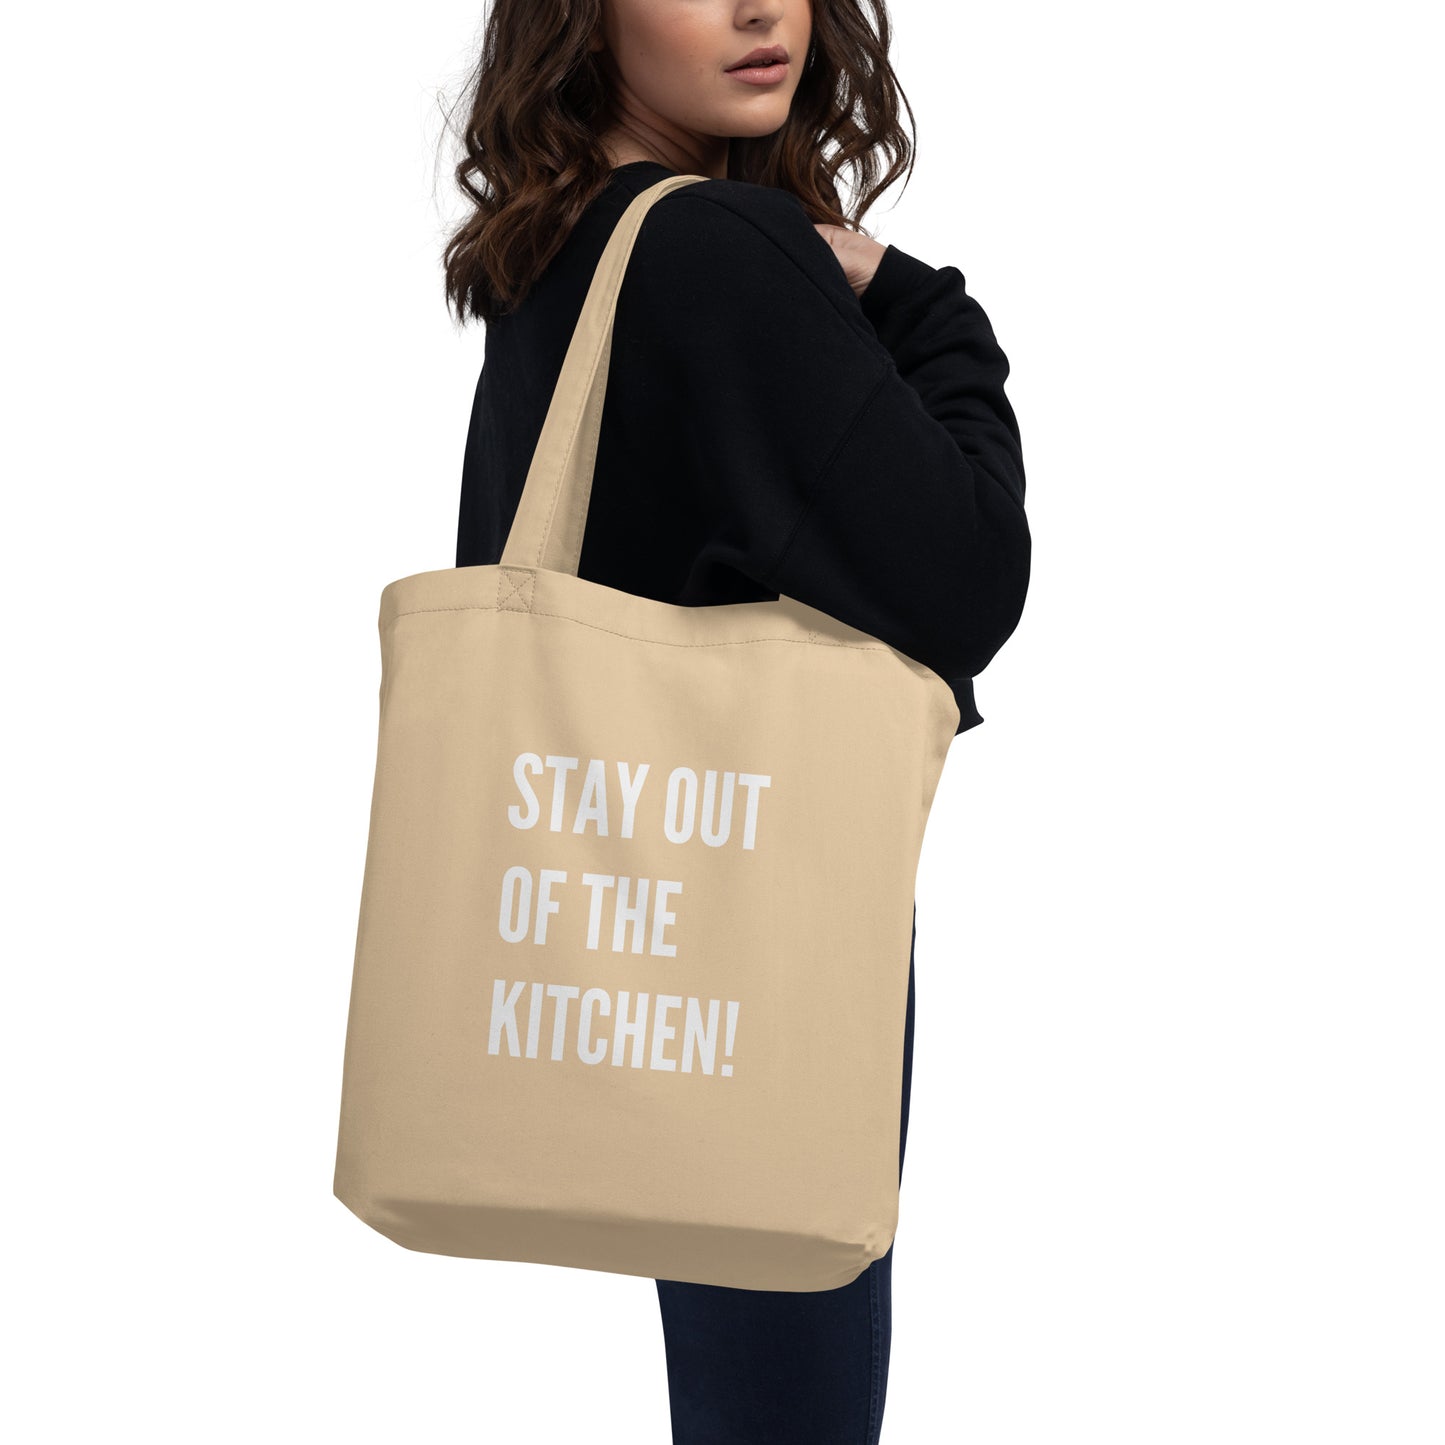 Stay Out of the Kitchen! - Eco Tote Bag